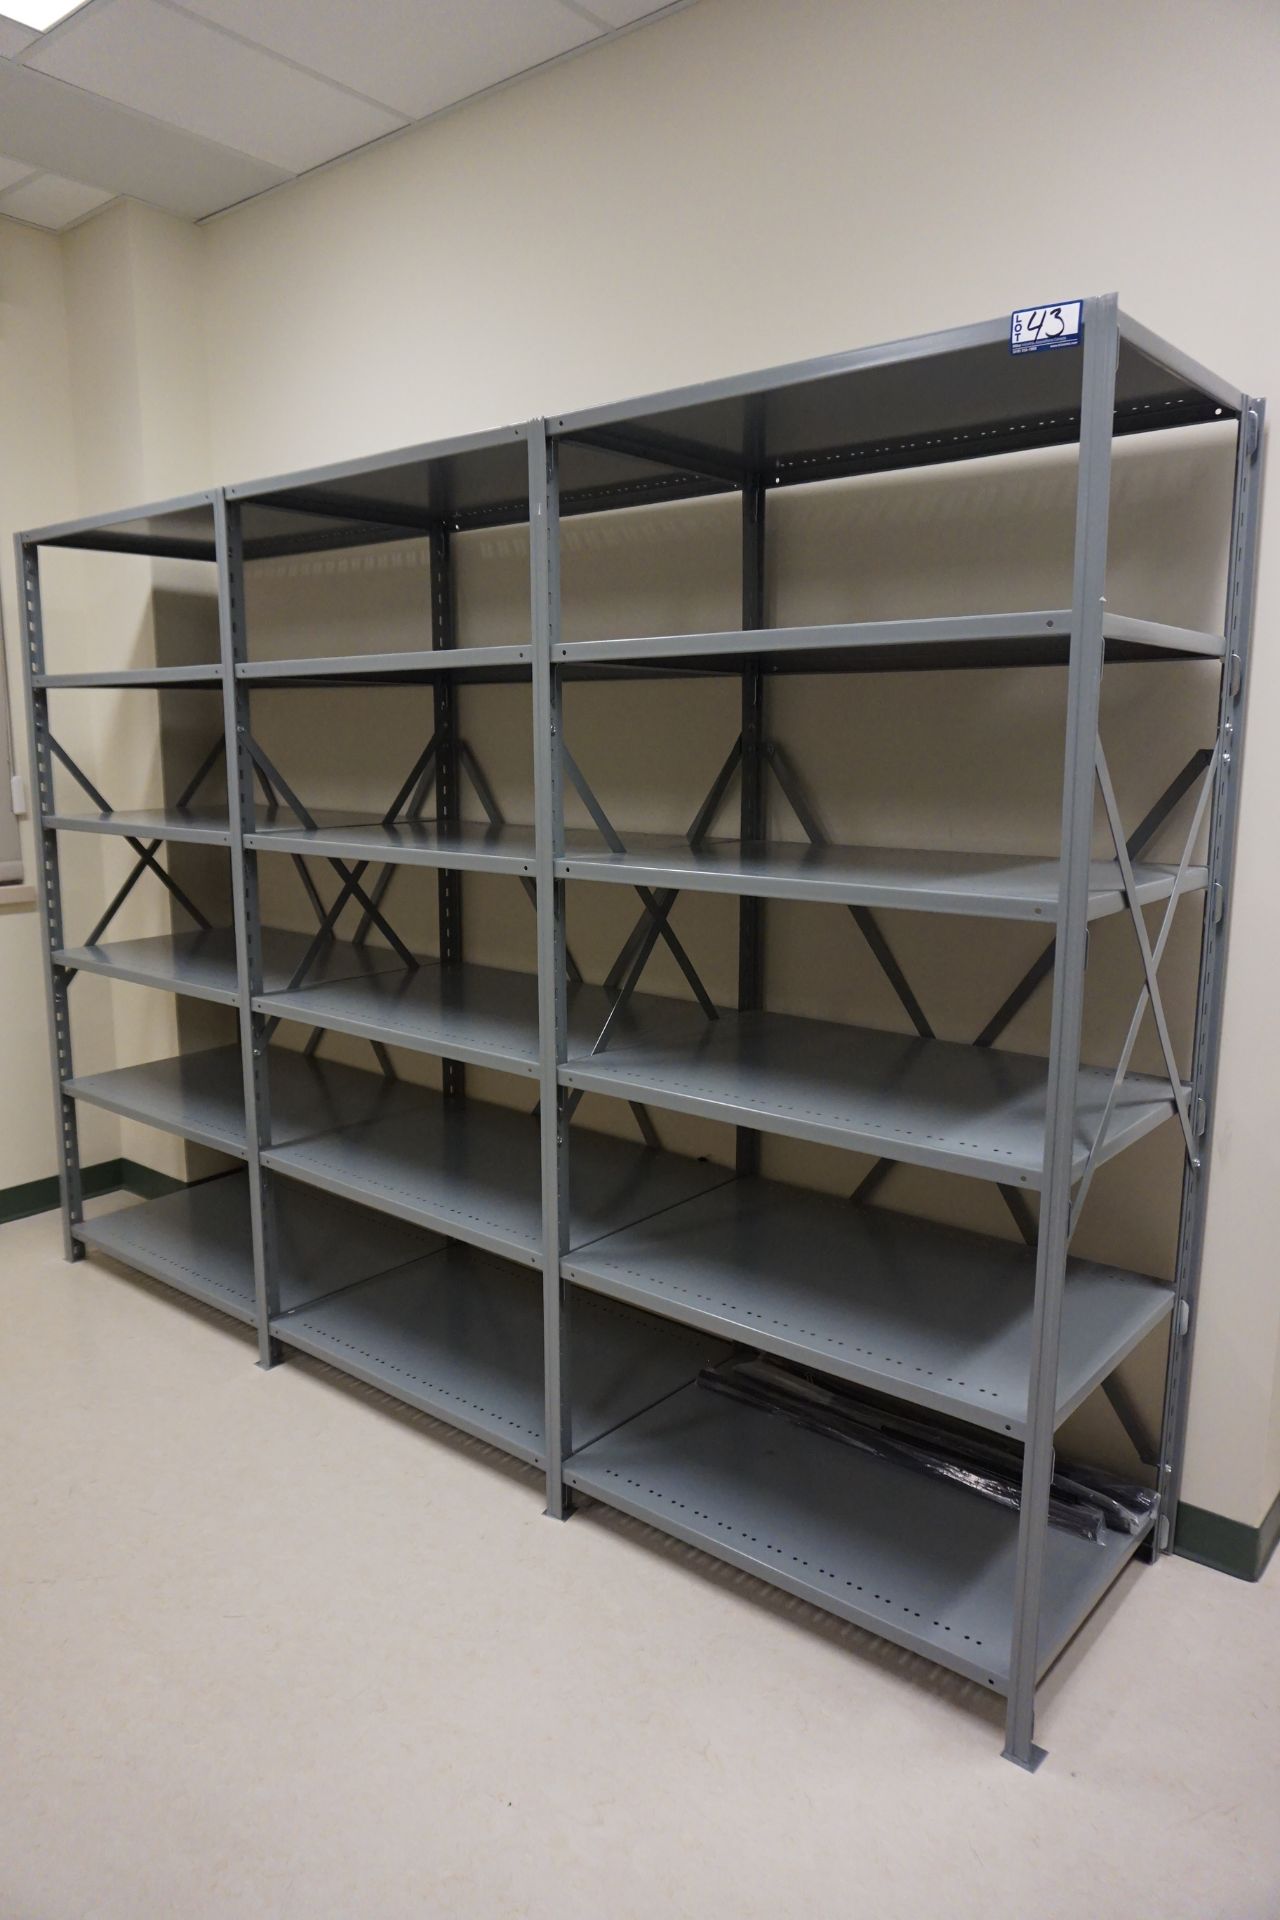 Sections of Clip Shelving - Image 2 of 2